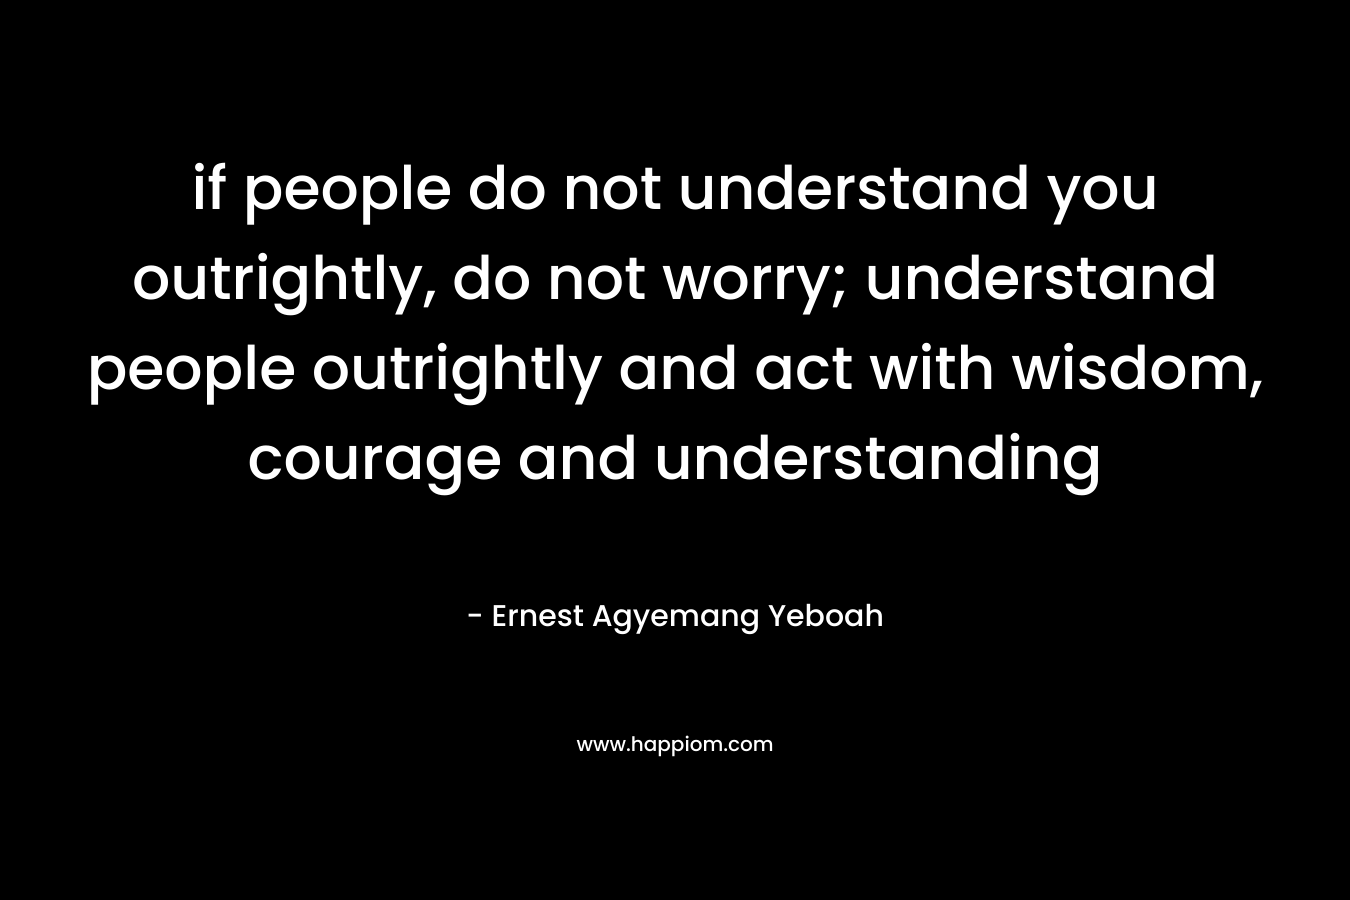 if people do not understand you outrightly, do not worry; understand people outrightly and act with wisdom, courage and understanding